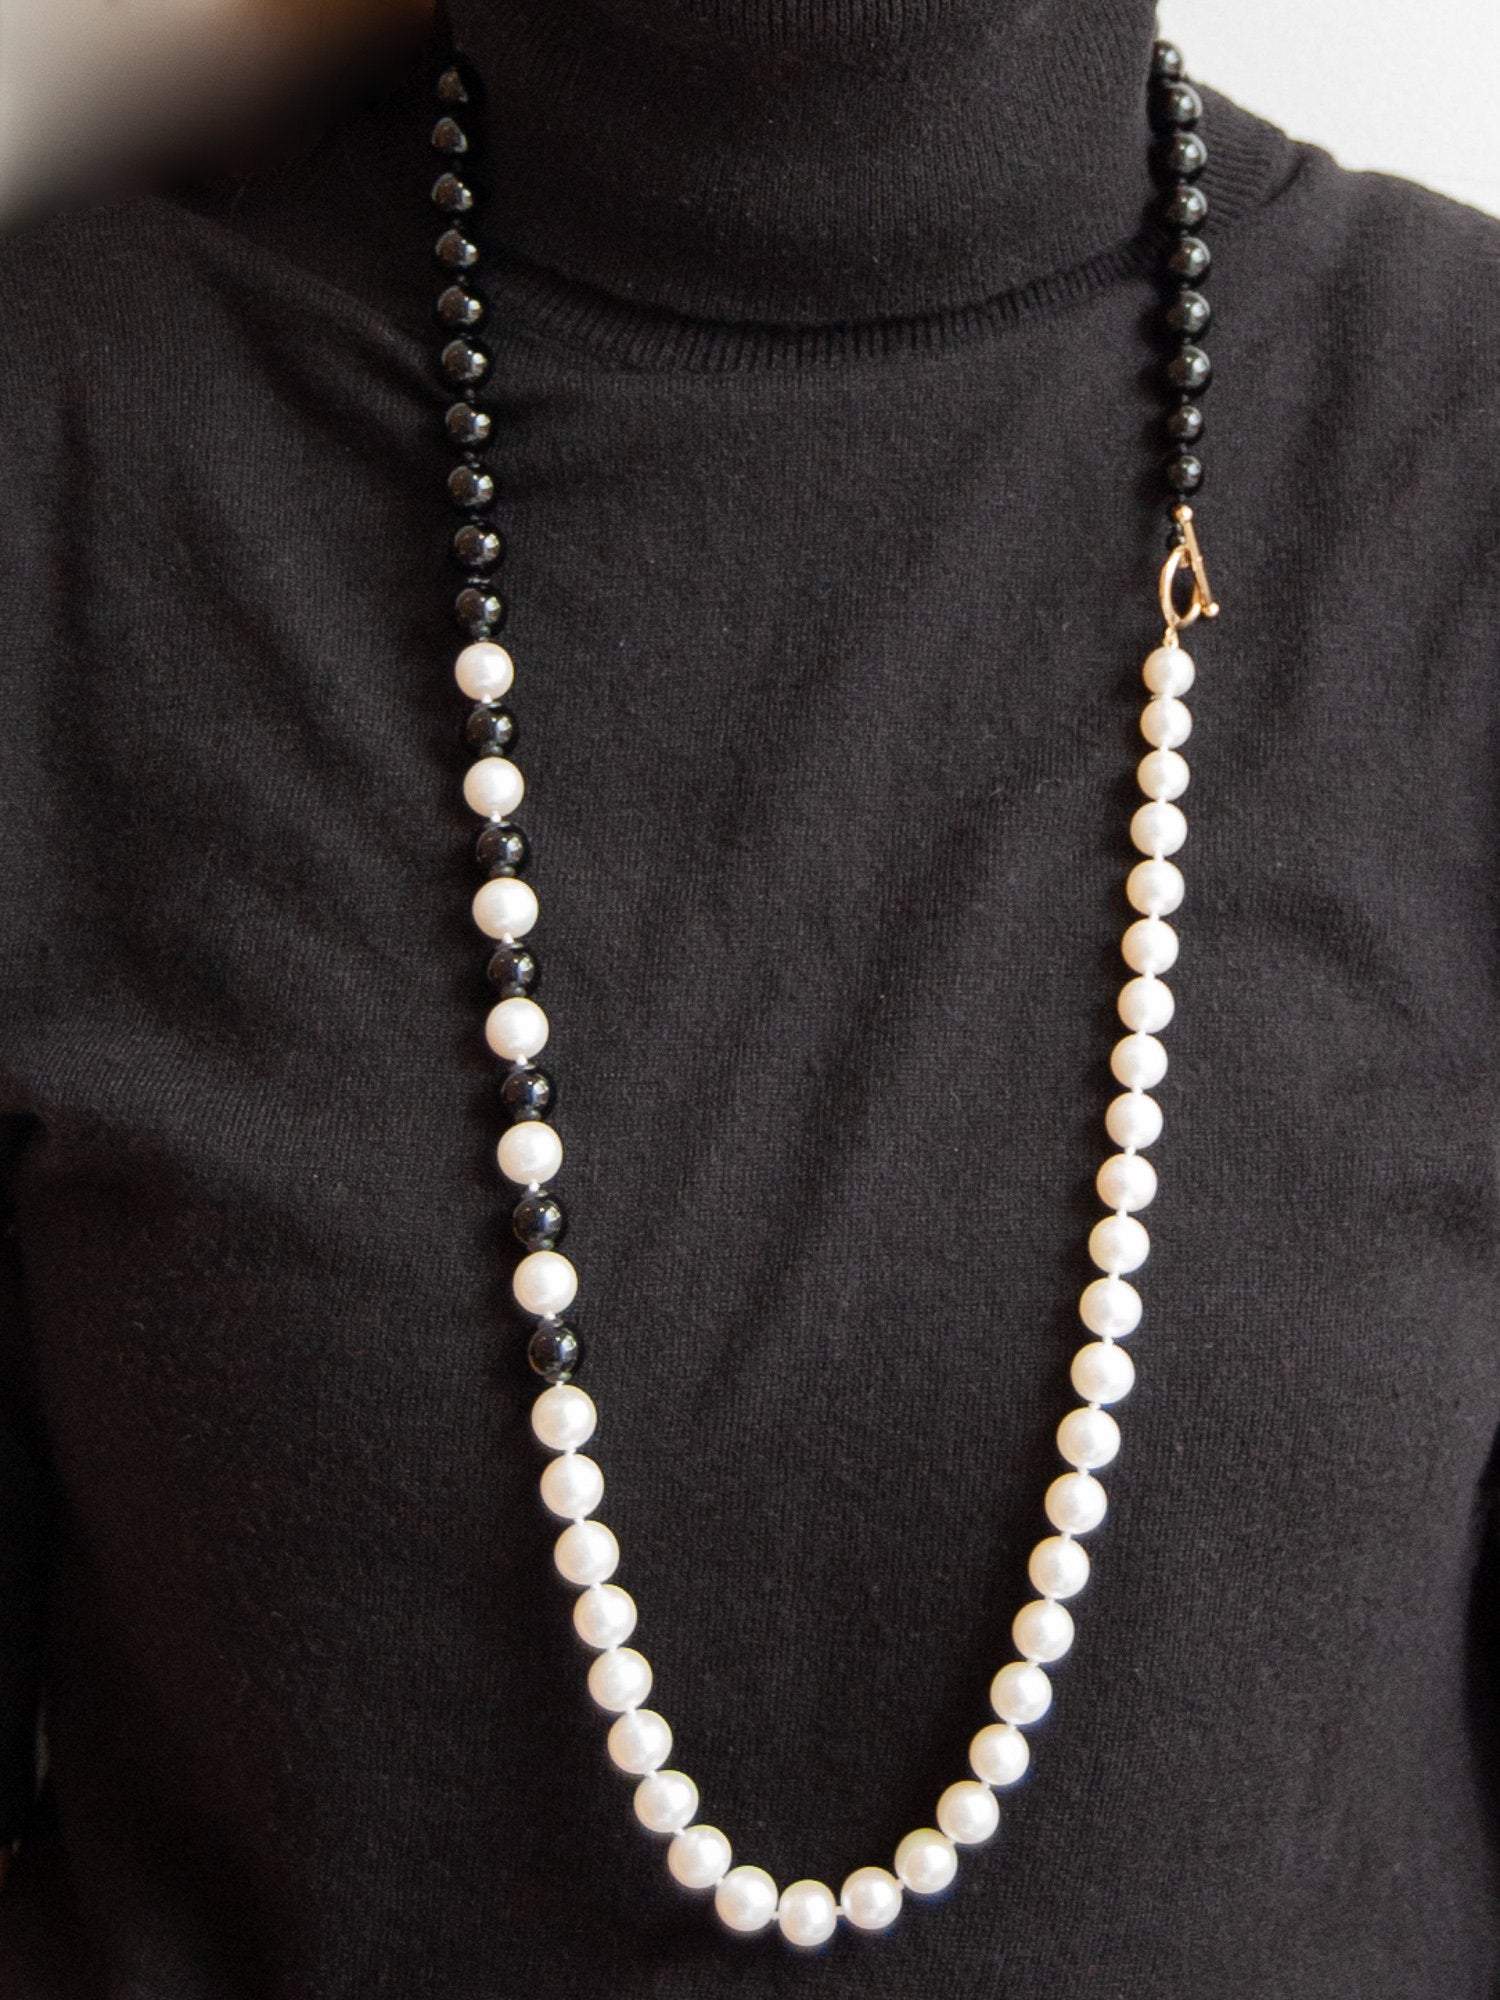 Long Double Strand Cultured Pearl & Onyx Necklace by Rajola